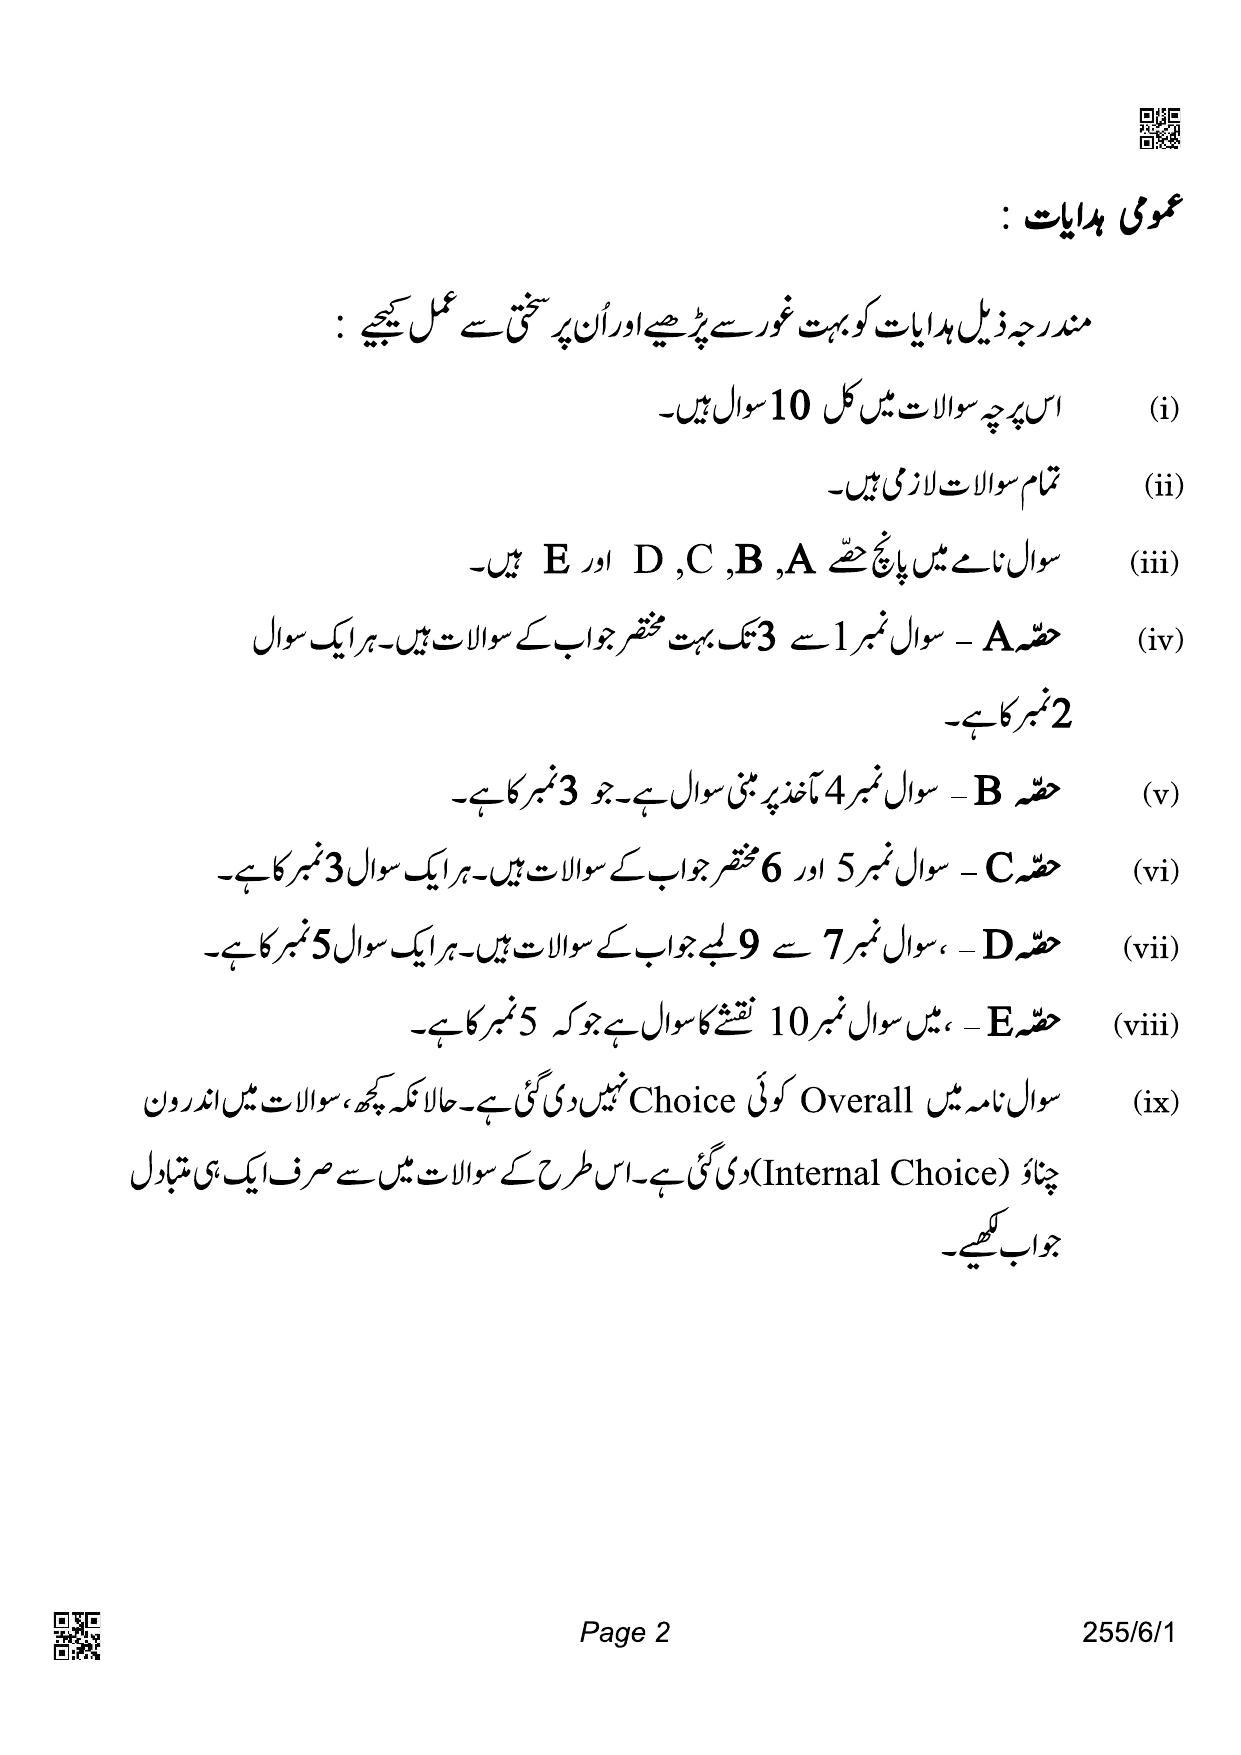 CBSE Class 12 255-6-1 Geography Urdu 2022 Compartment Question Paper - Page 2